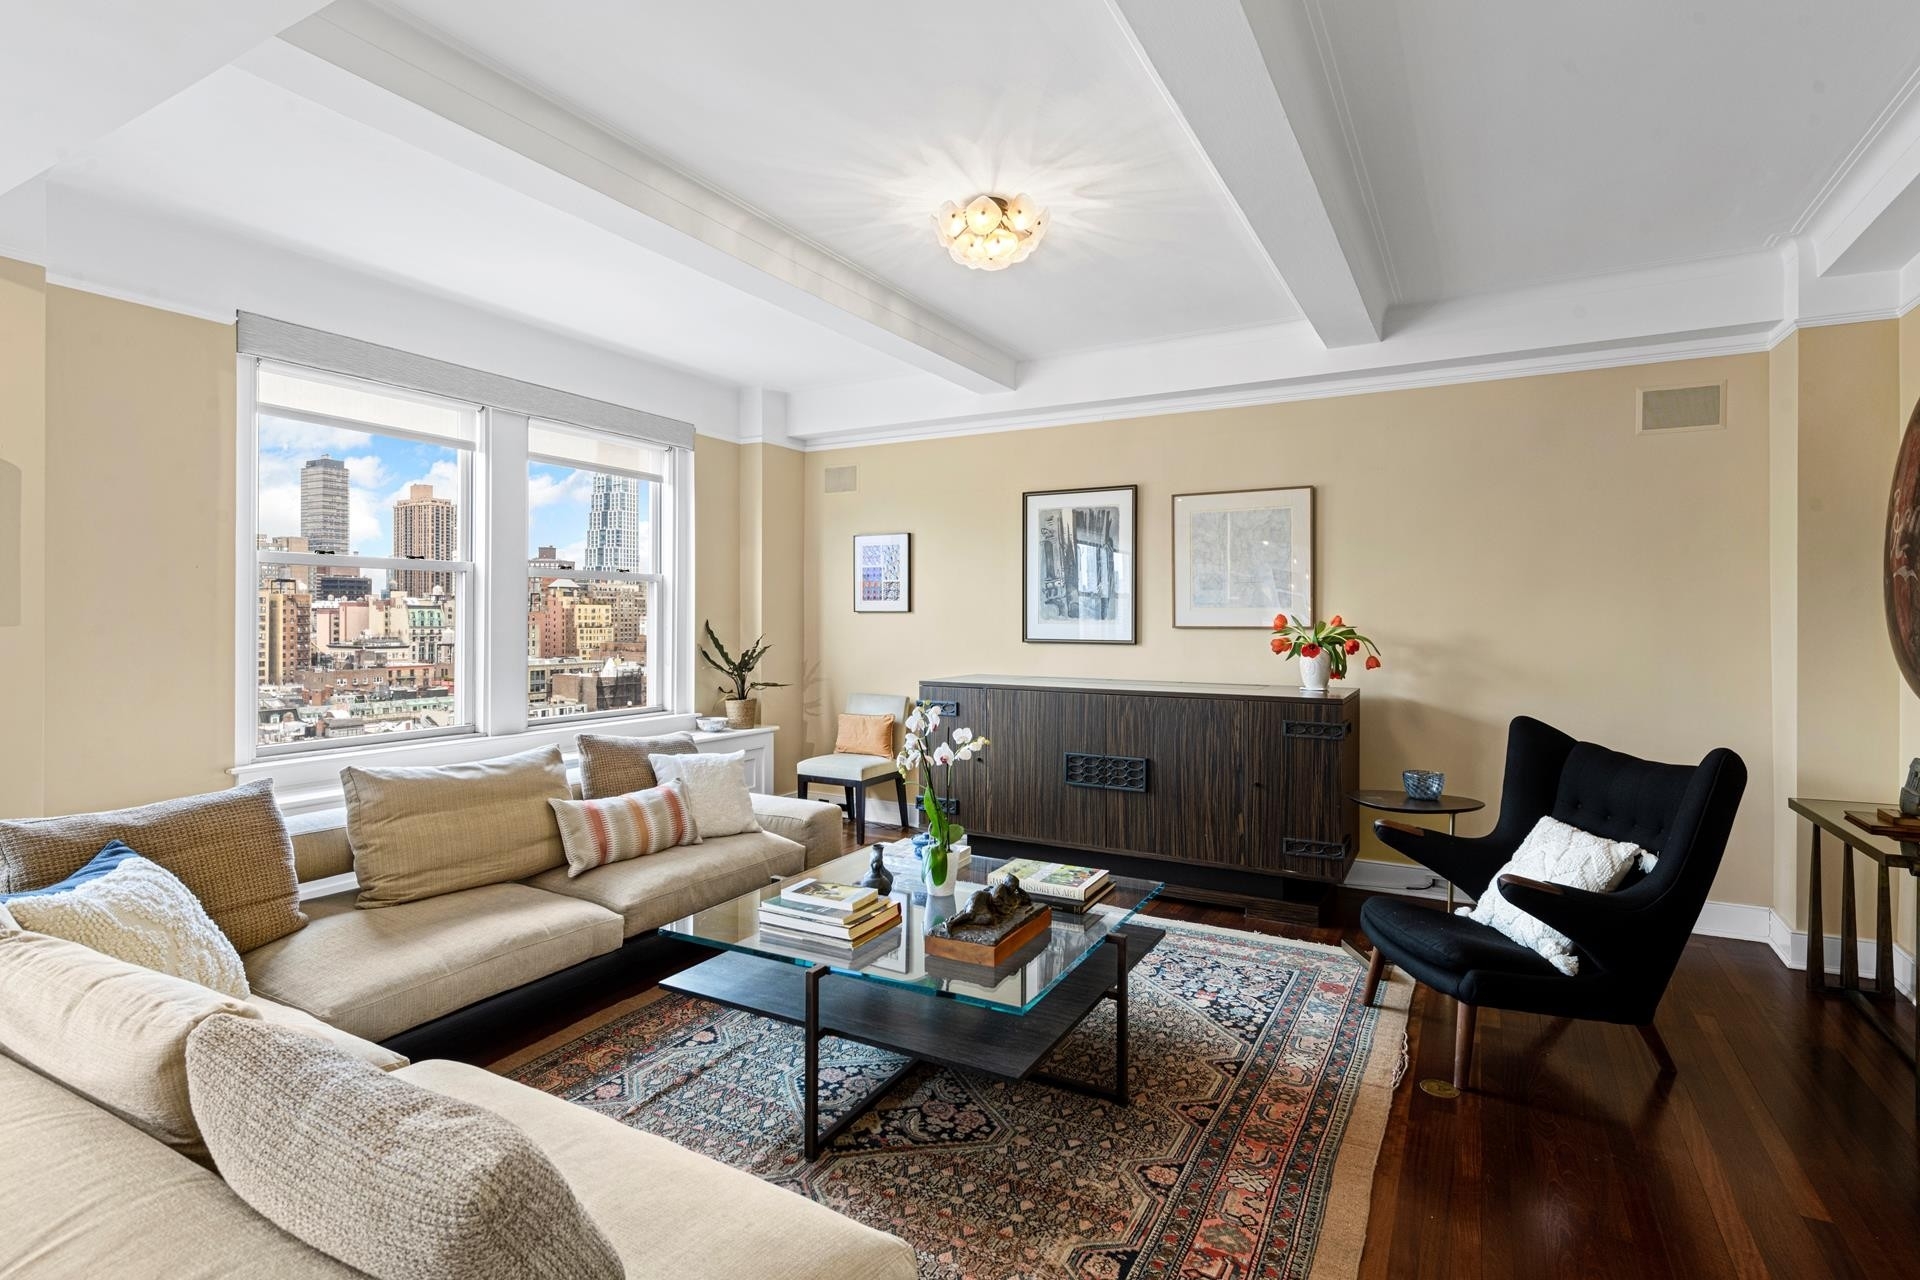 Co-op Properties for Sale at 6 W 77TH ST, 15C Upper West Side, New York, New York 10024